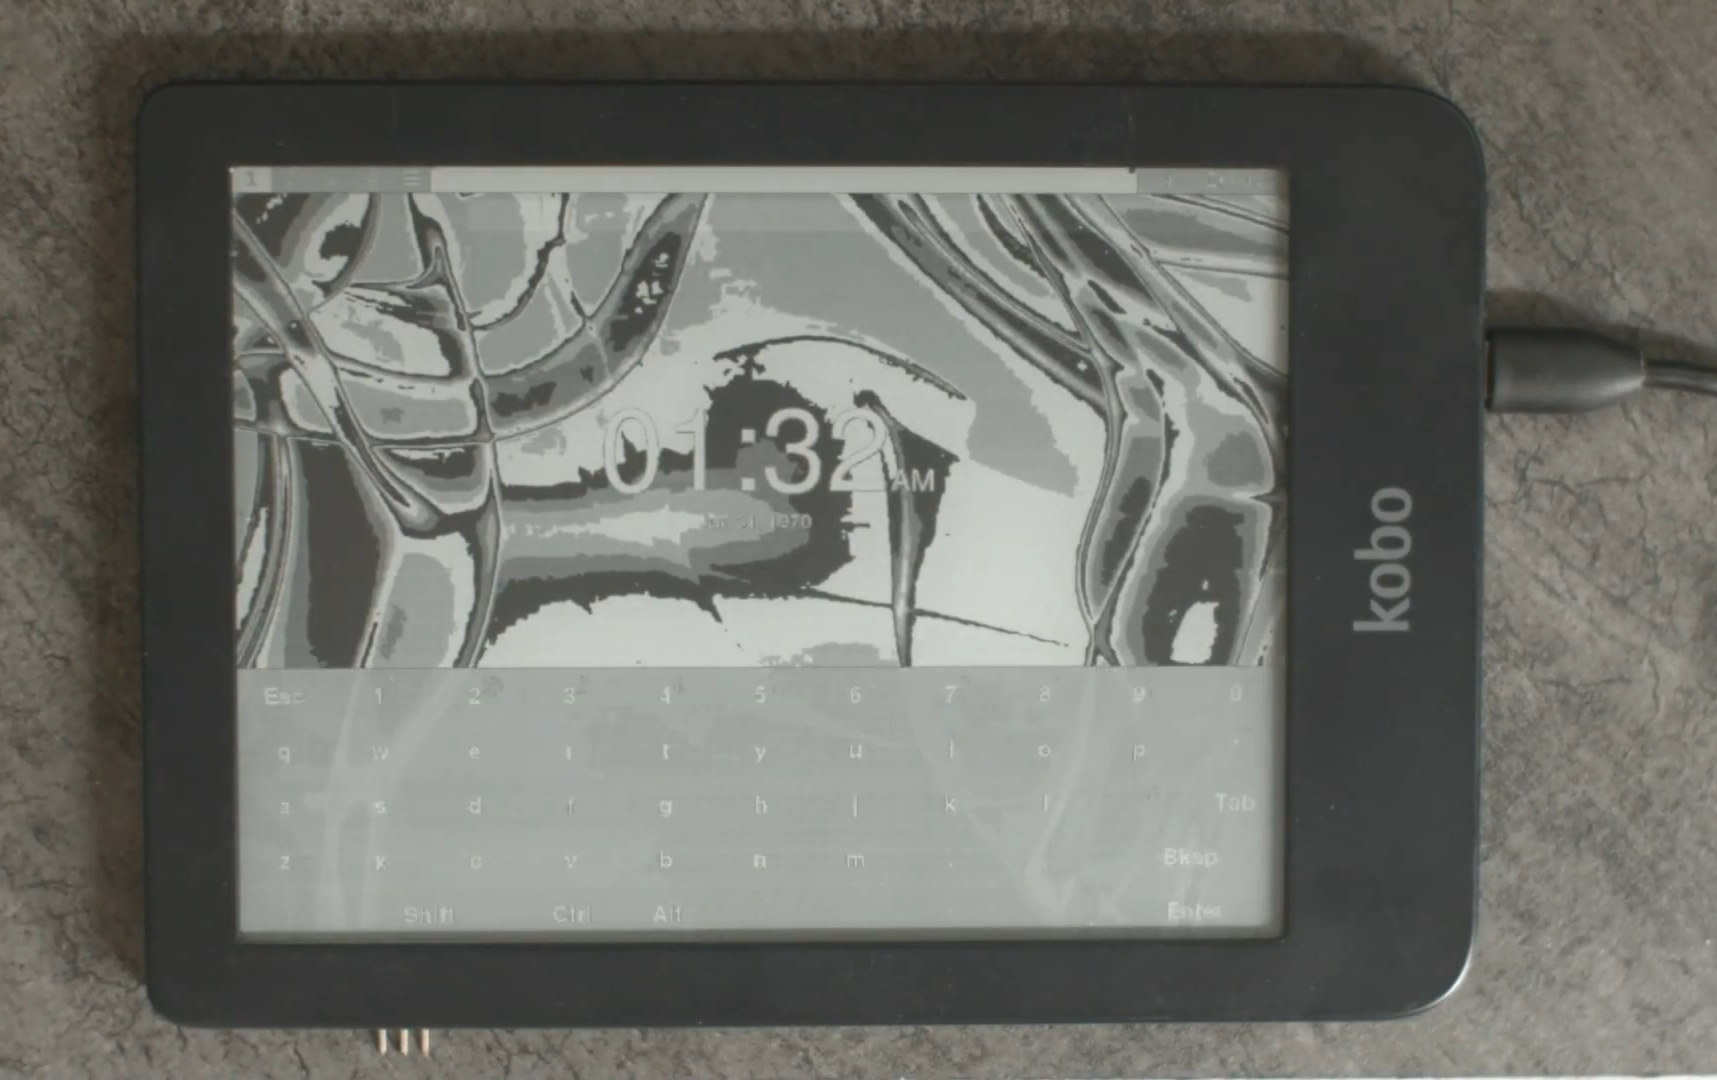 Kobo Clara HD becomes an E Ink Linux tablet with the help of